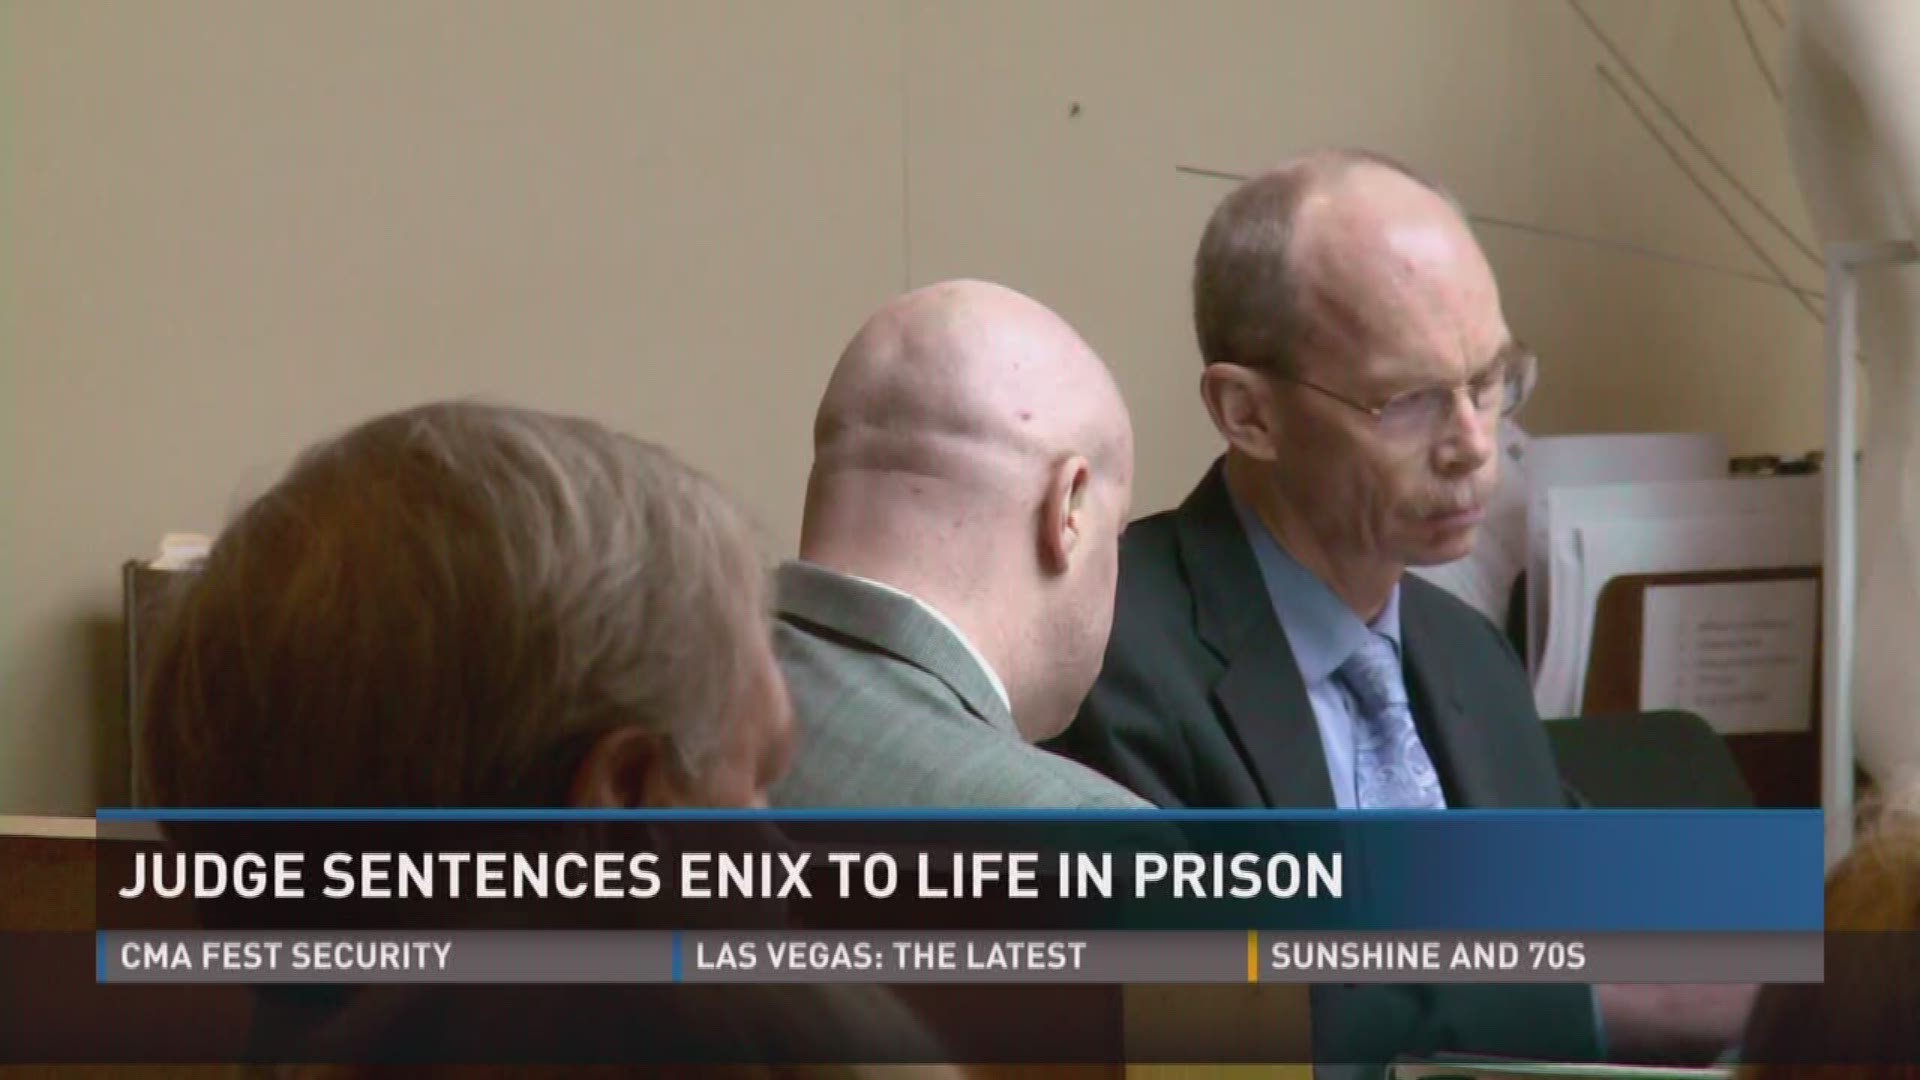 Tyler Enix was convicted of murdering his wife last week. The jury could not agree on a life sentence with or without parole, so the judge passed the sentence.